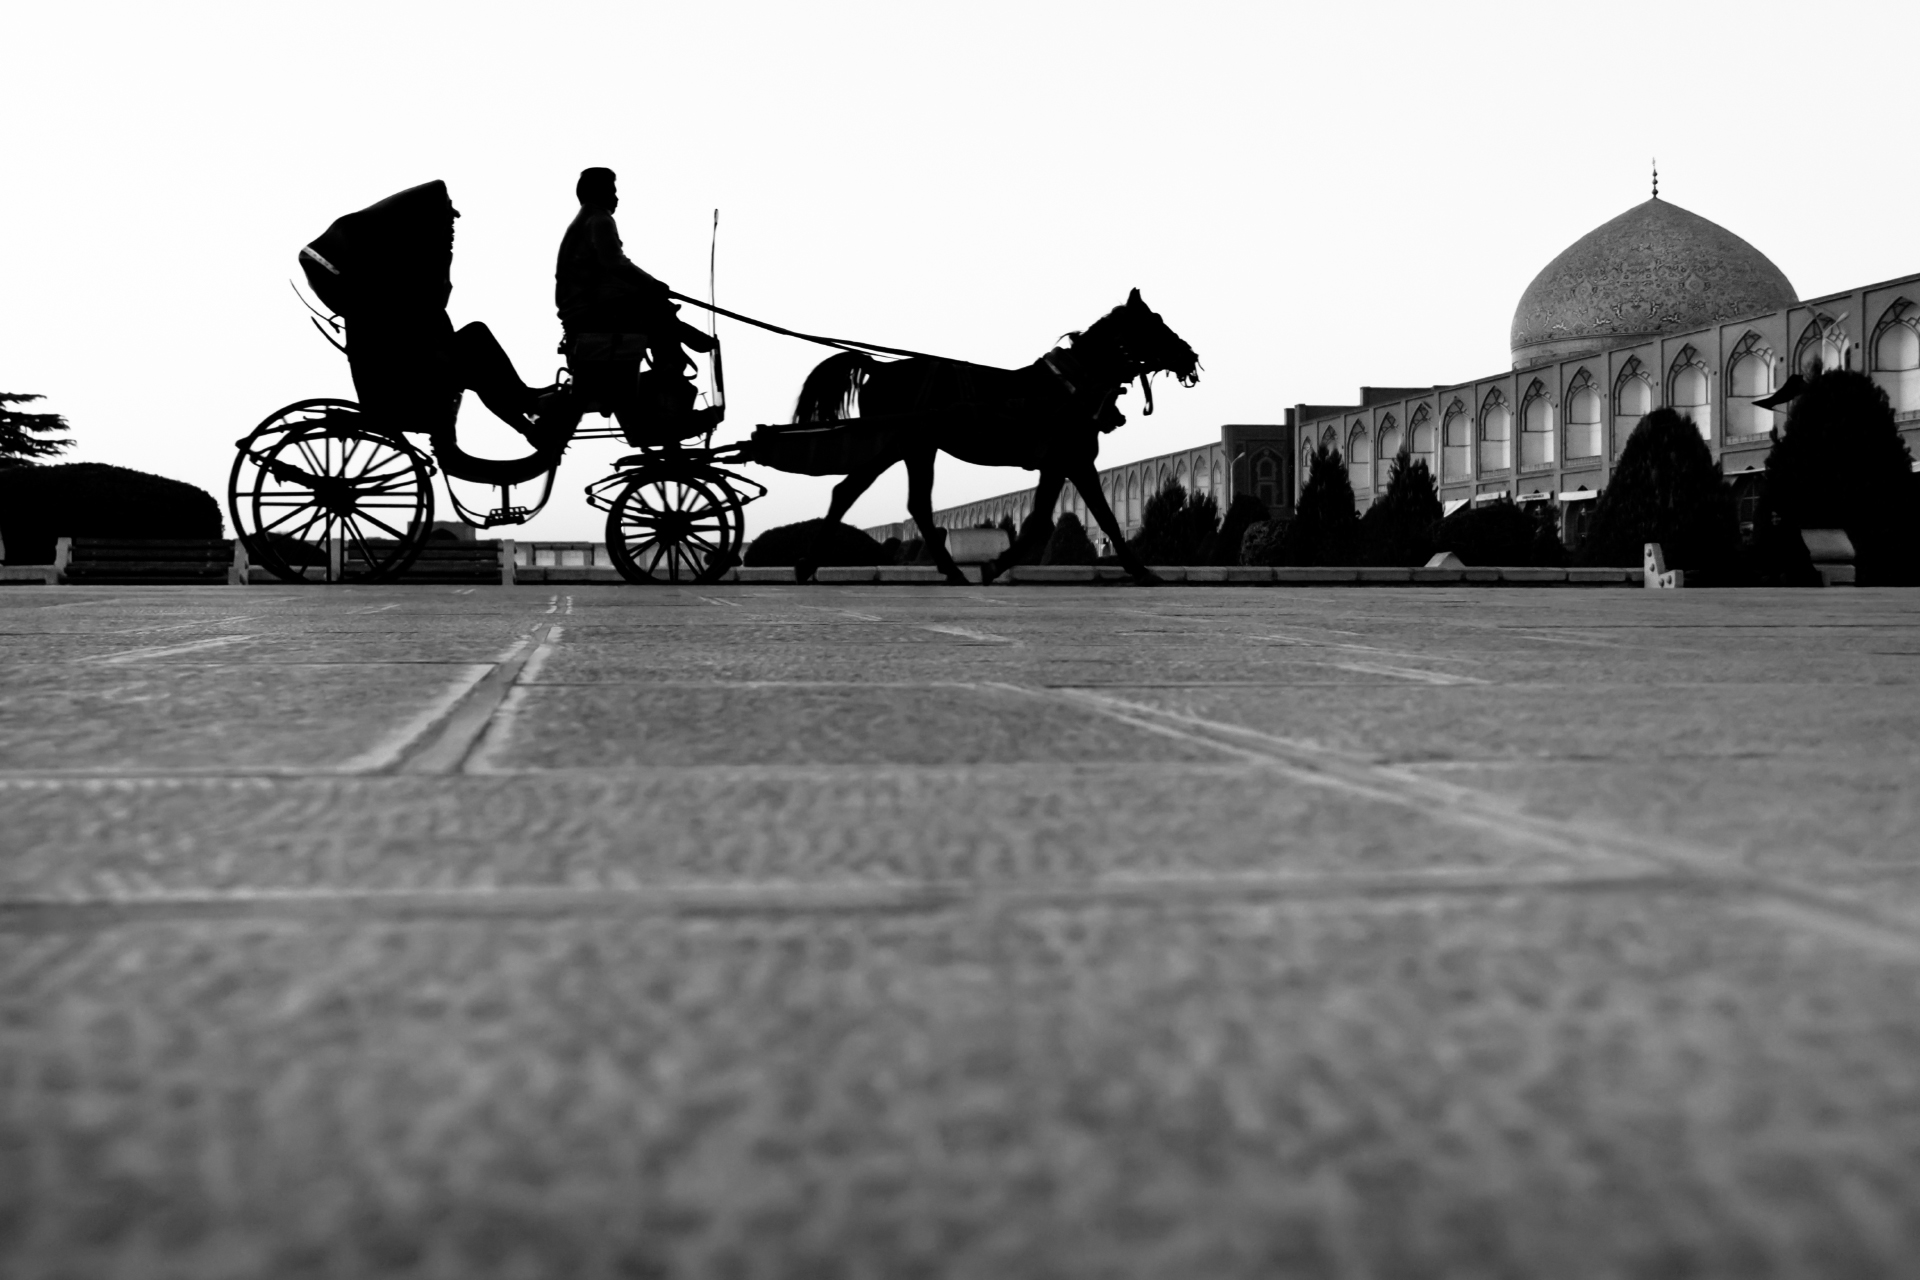 The carriage...